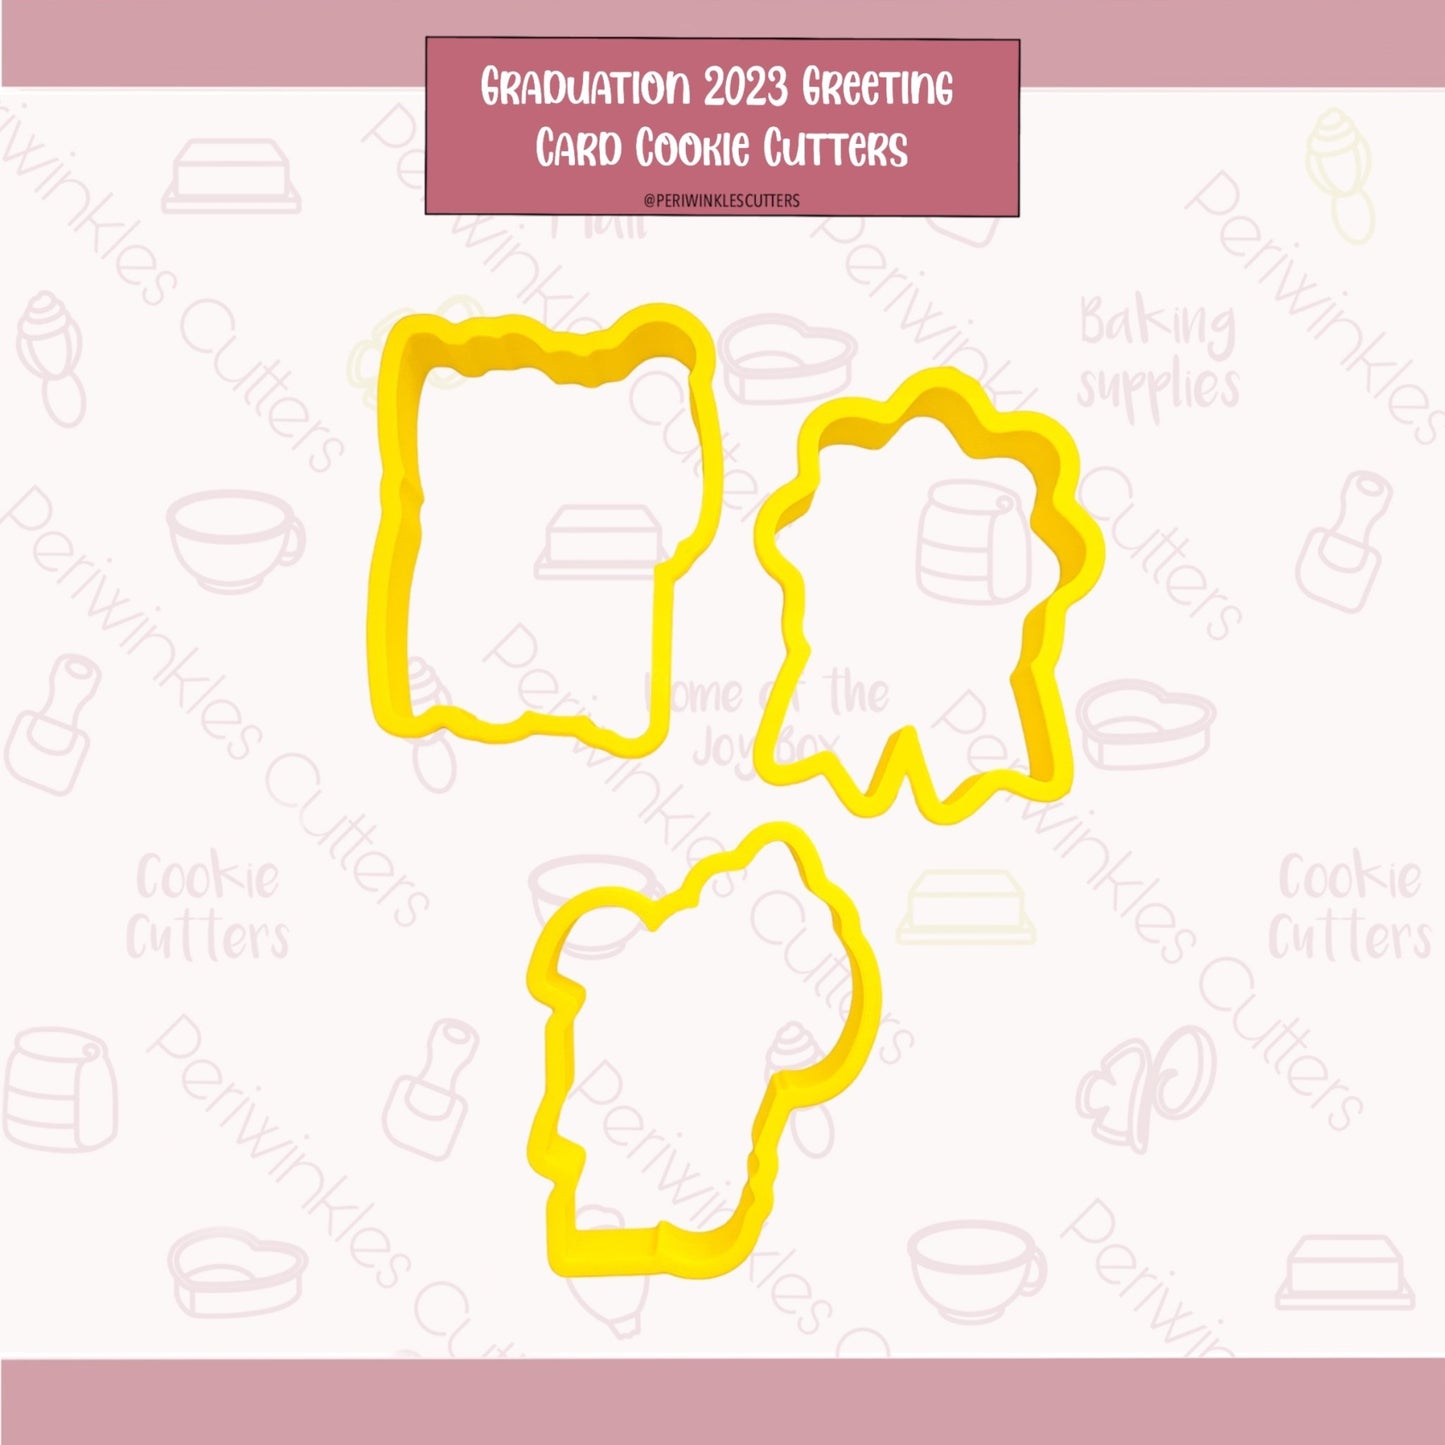 Graduation 2023 Greeting Card Cookie Cutters - Periwinkles Cutters